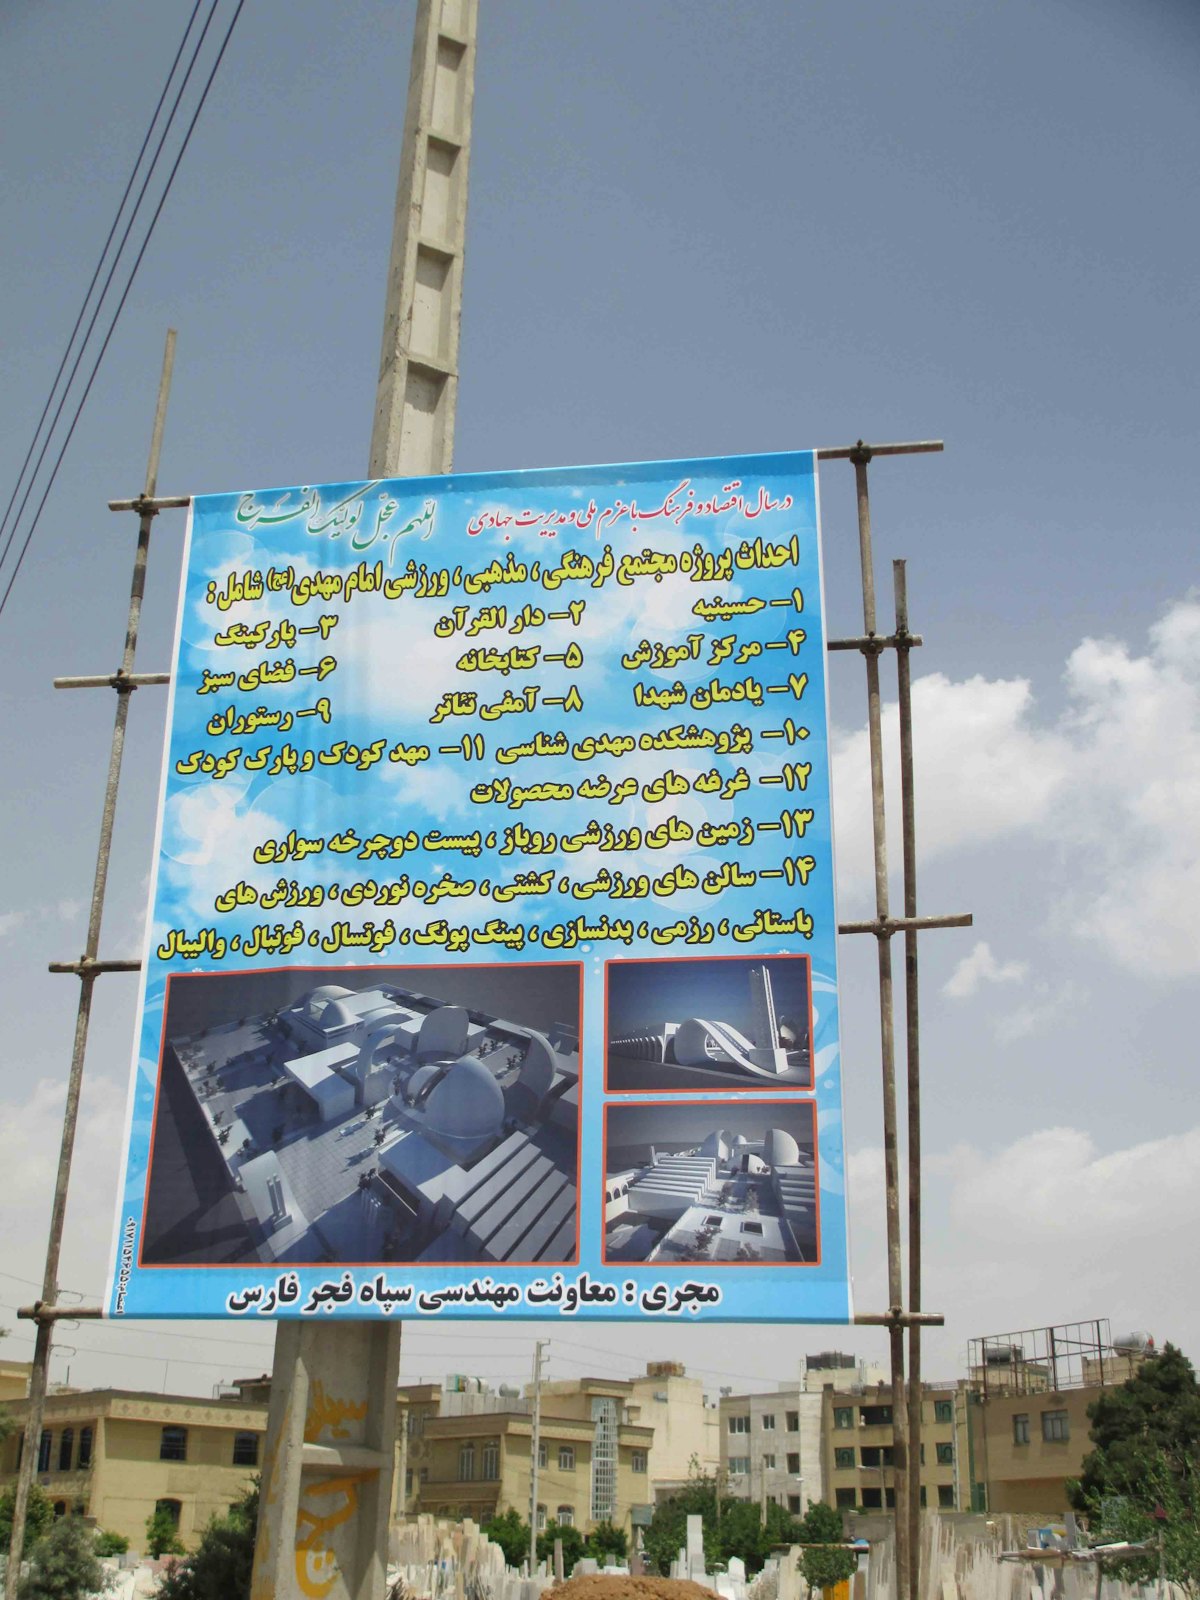 A poster at the entrance to the cemetery provides images of the Revolutionary Guards’ planned construction of a sports and cultural complex that will include a library, mosque, restaurant, theatre, child care facility and sports hall.